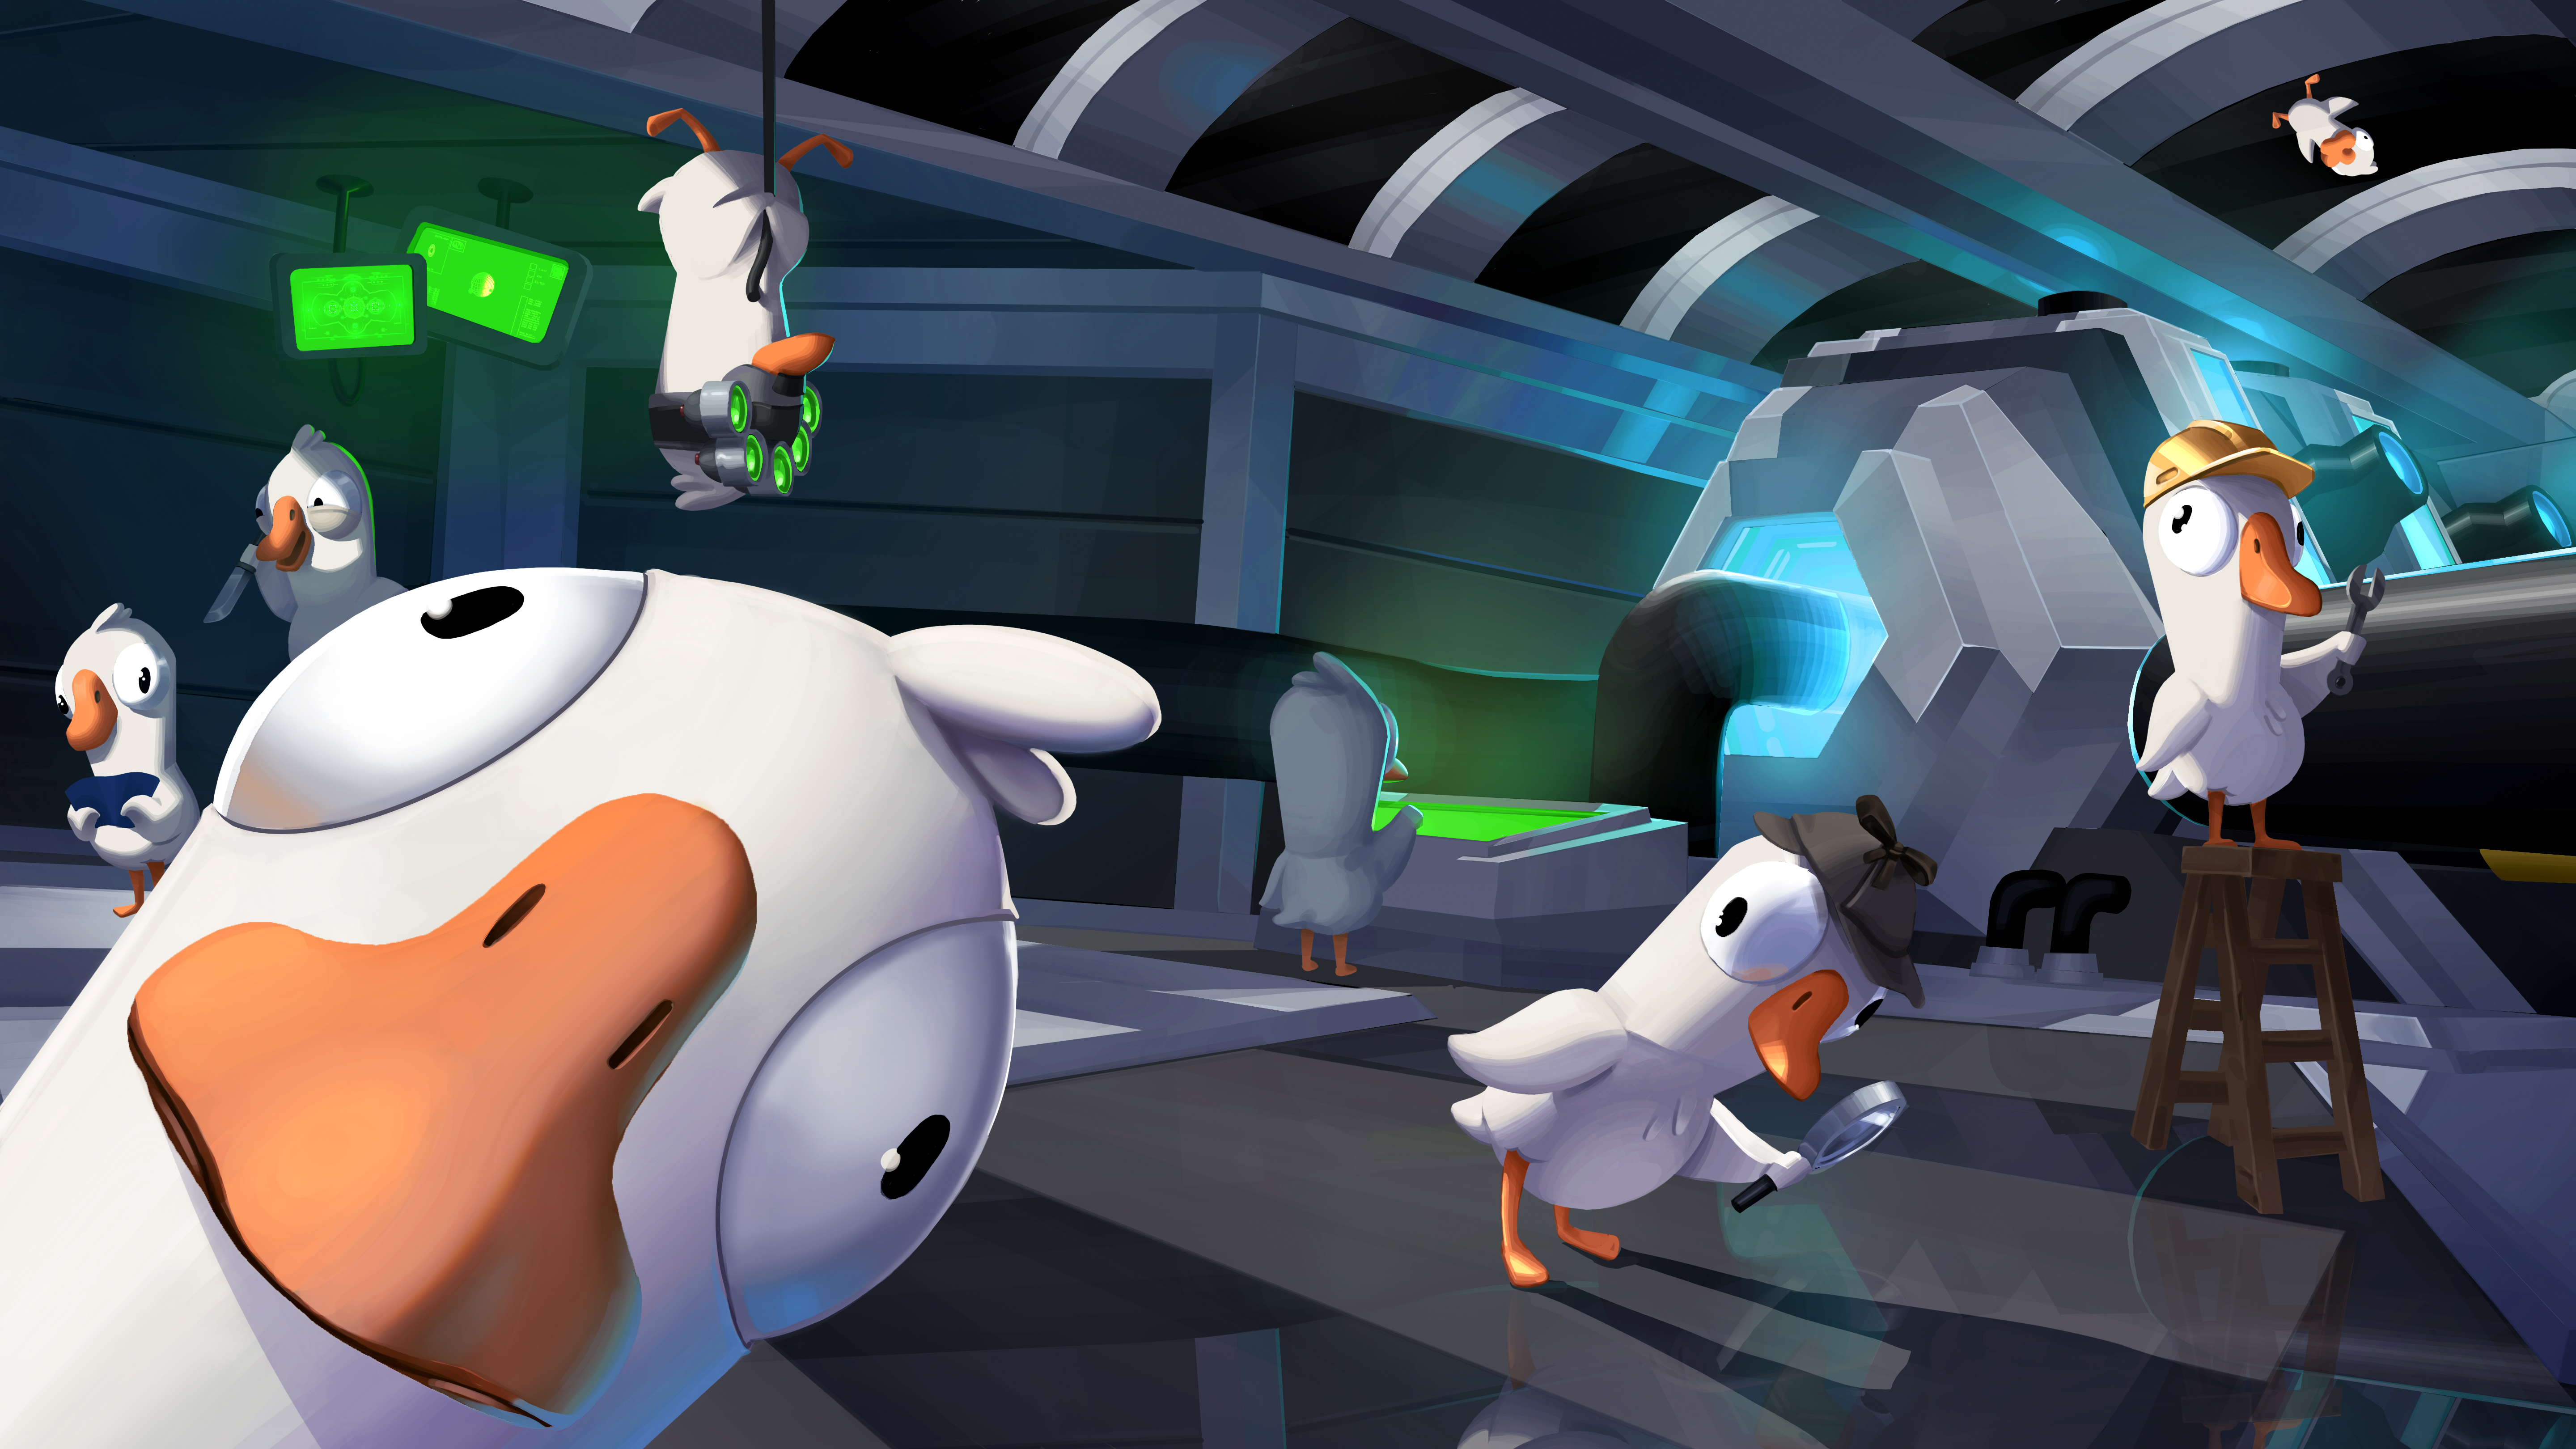 Video Game Goose Goose Duck HD Wallpaper | Background Image